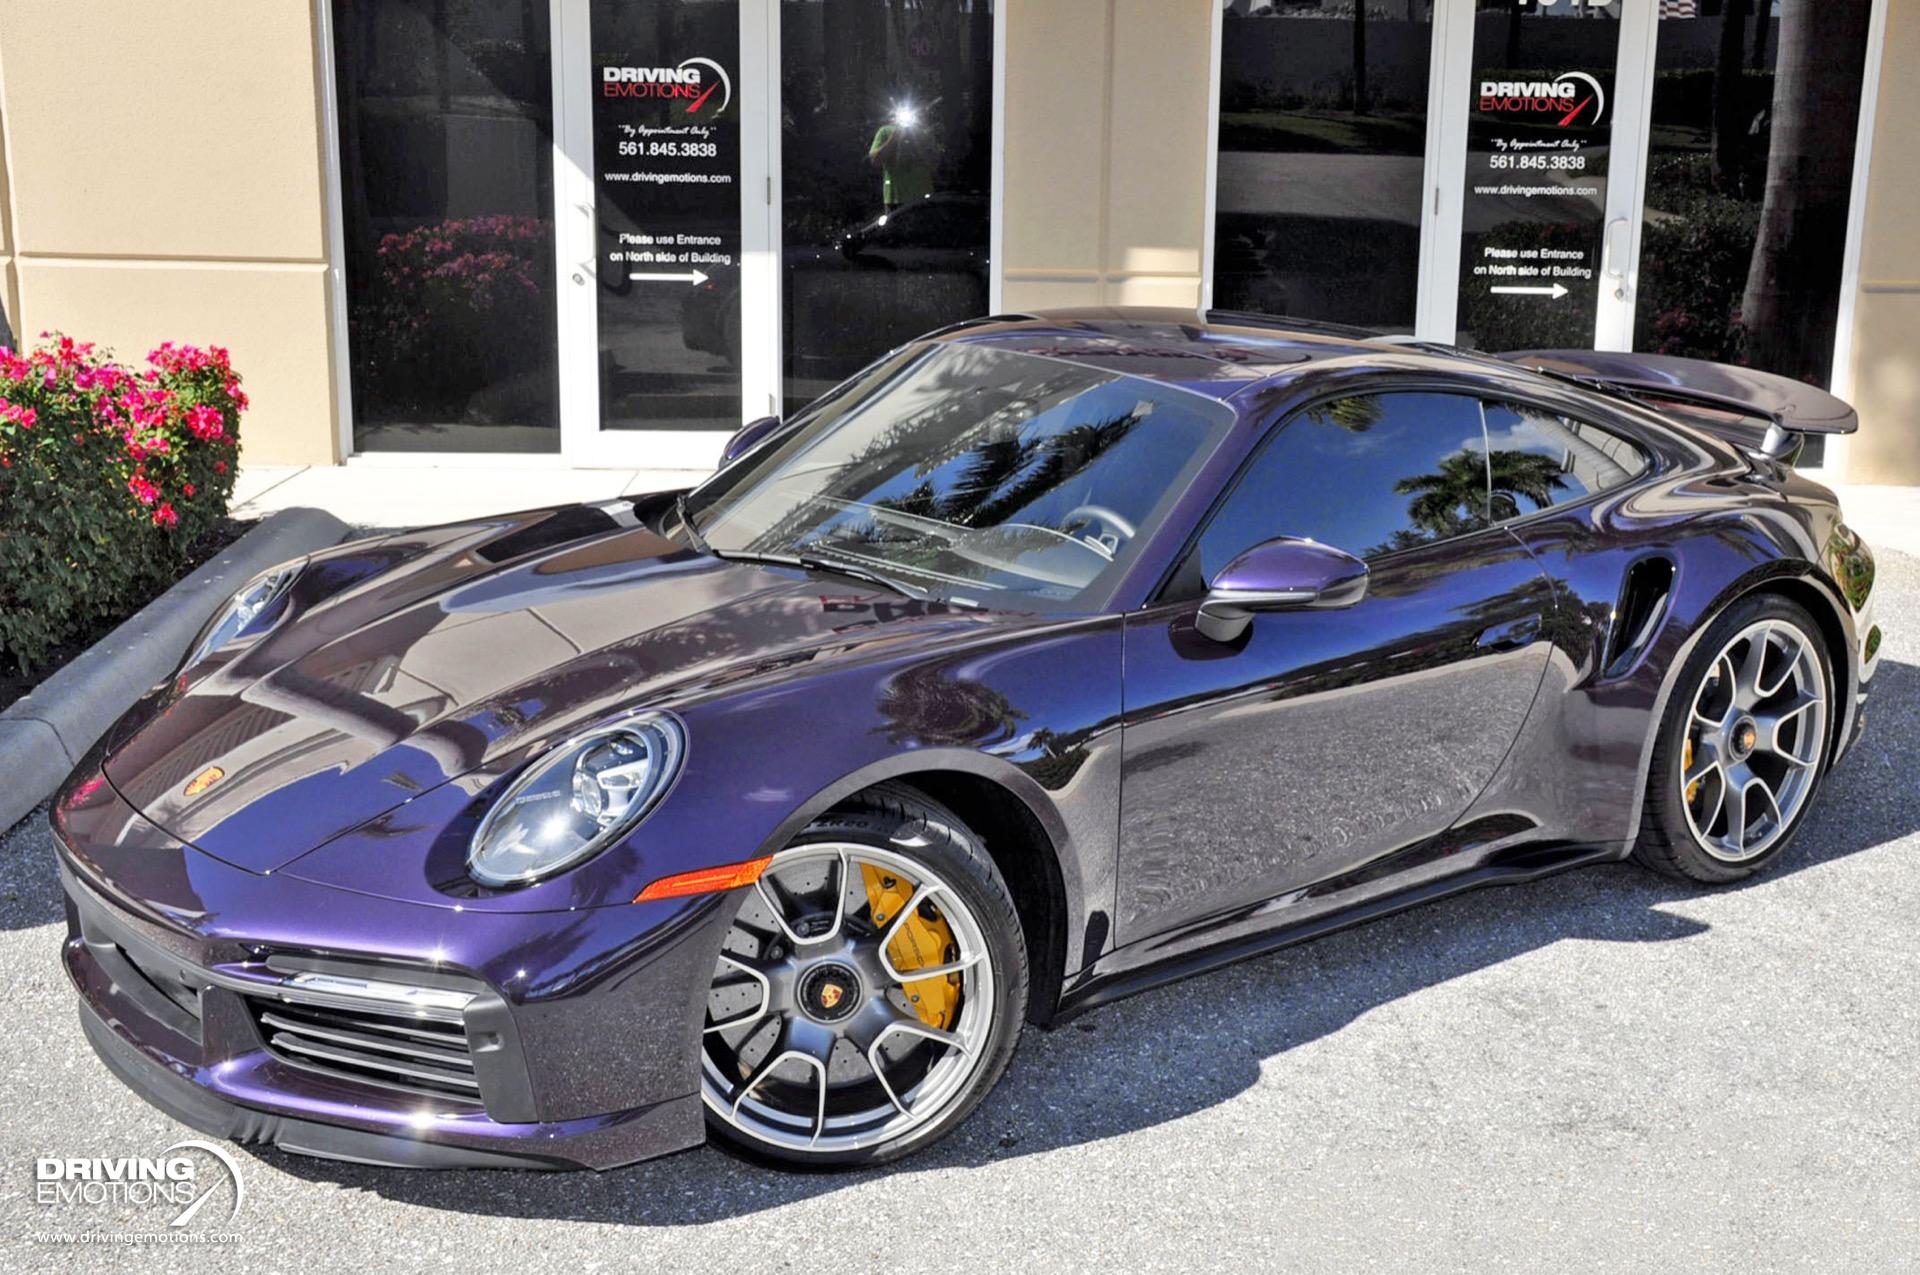 Used 2021 Porsche 911 Turbo S Coupe Turbo S PAINT TO SAMPLE VIOLA! SPORT EXHAUST! LOADED!! | Lake Park, FL